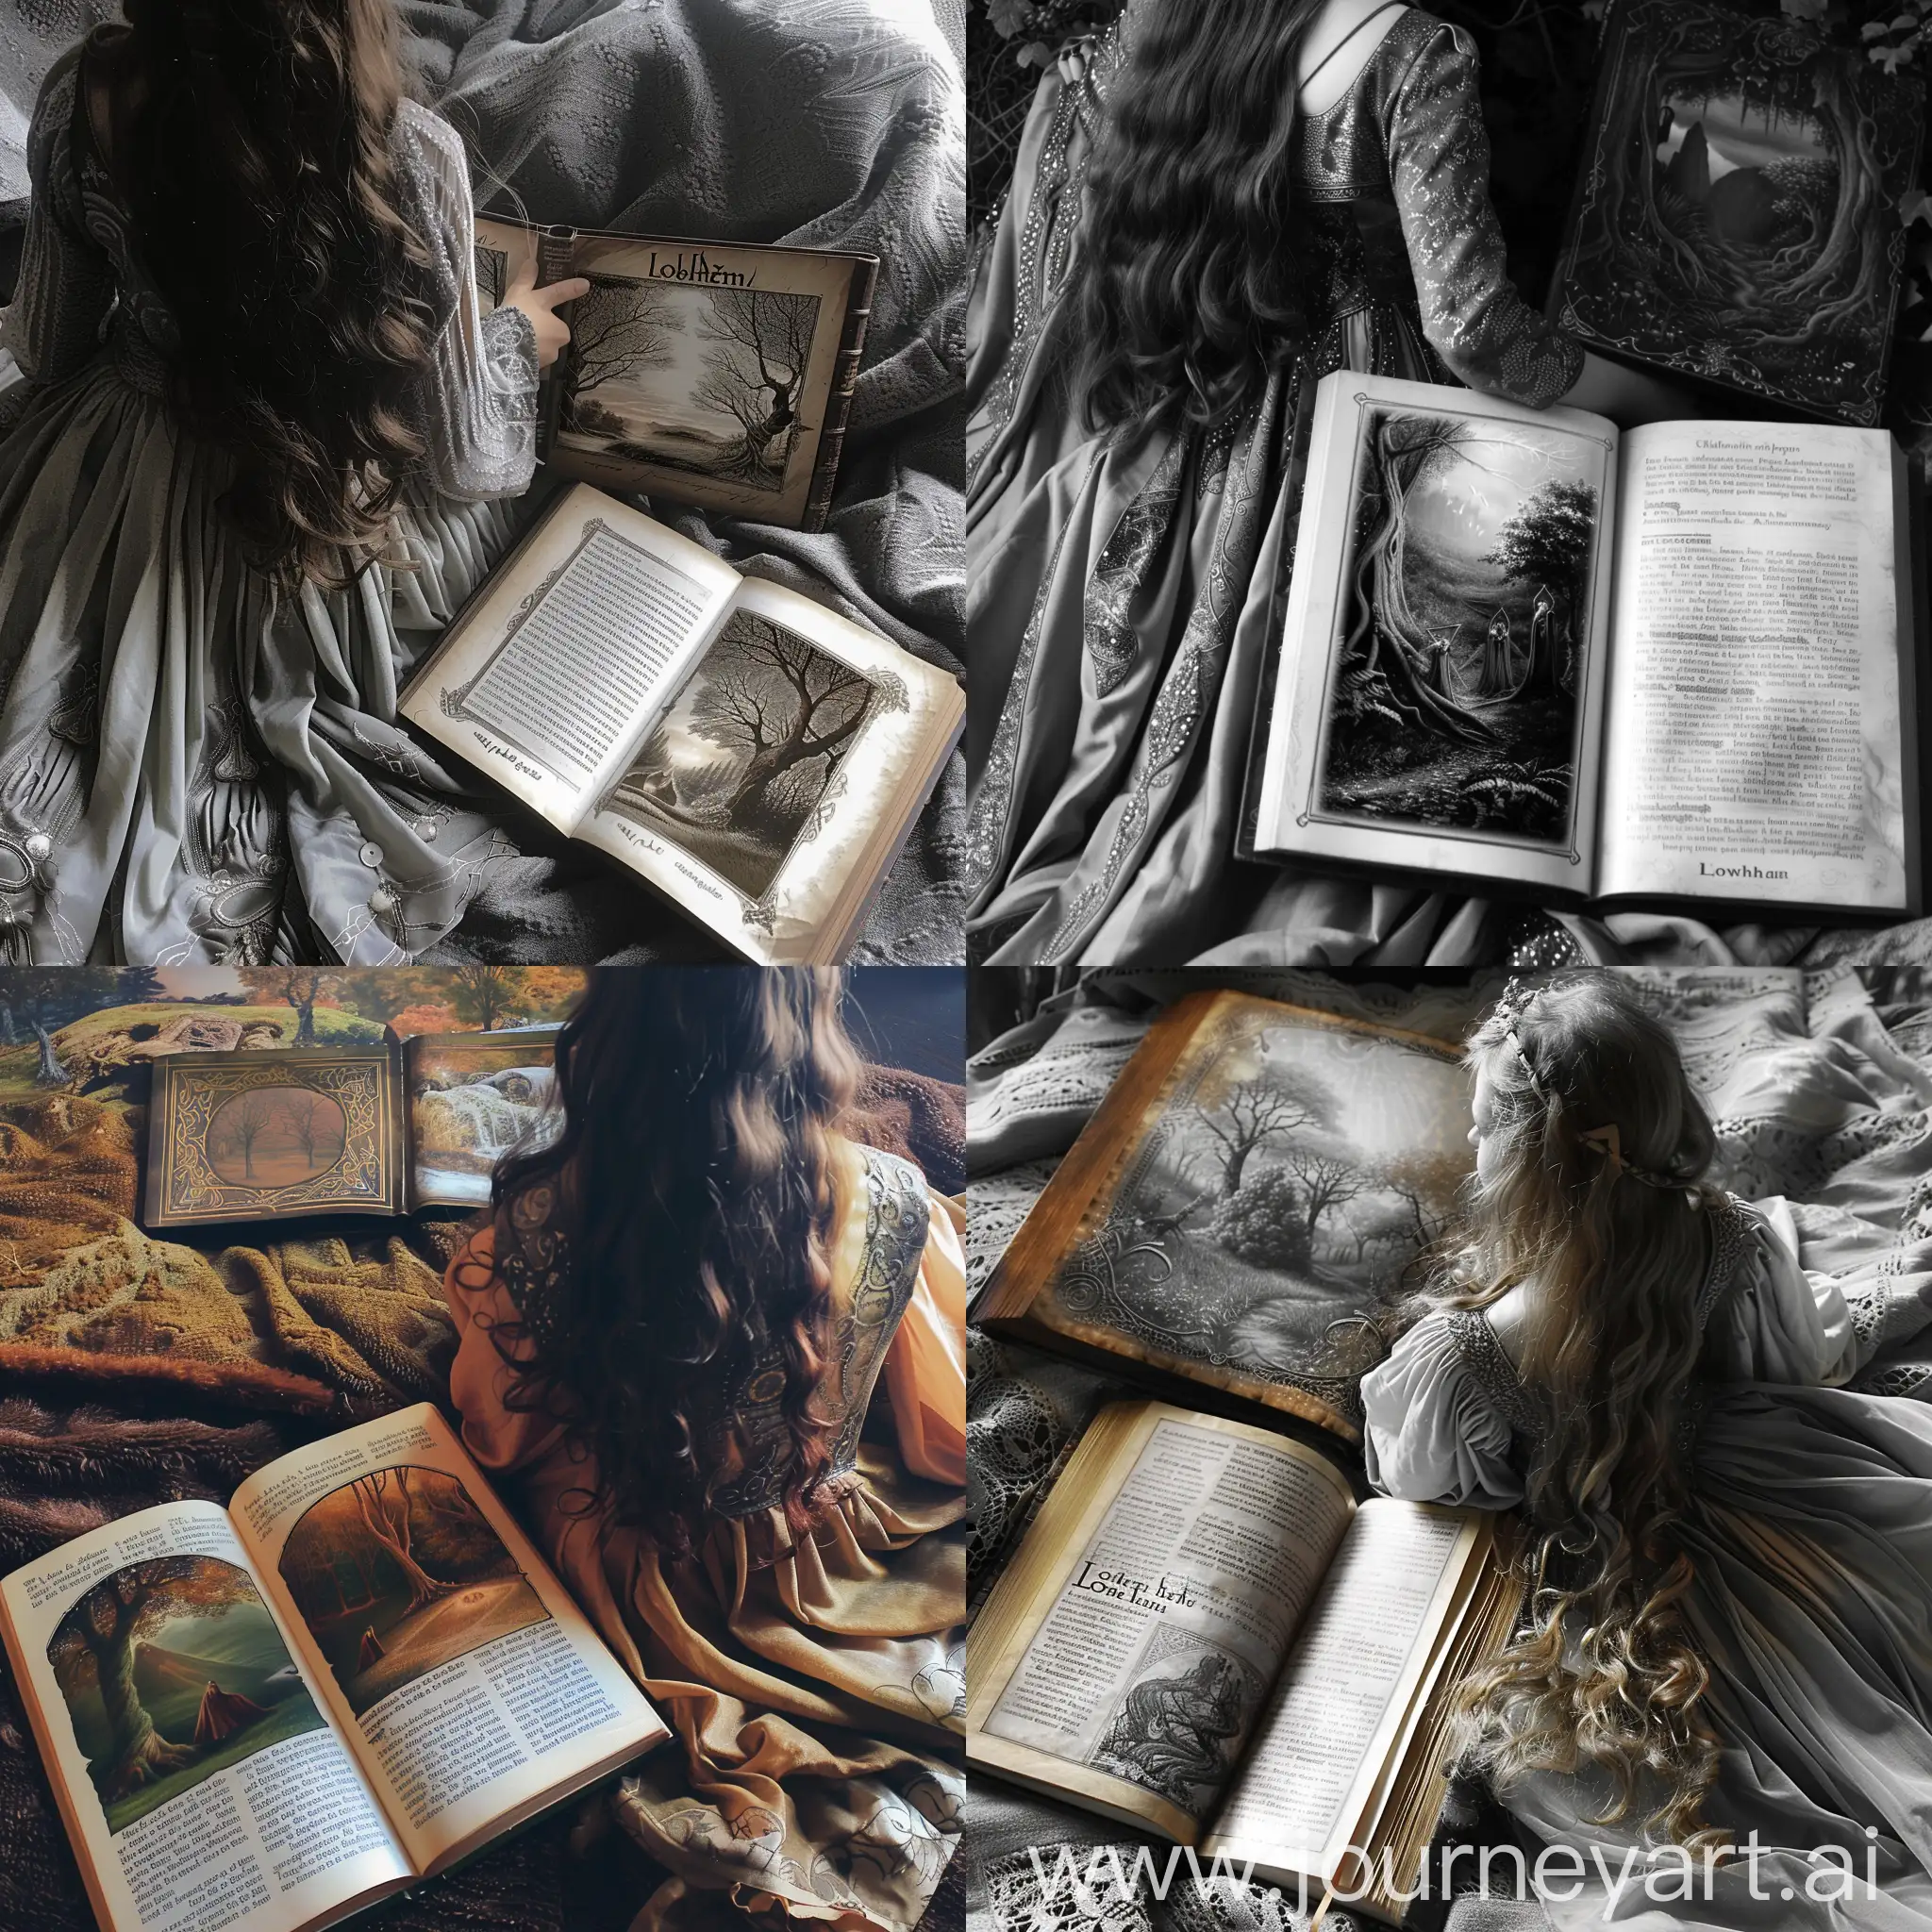 the book is open there is a picture about Lothlórien, elves and trees, a book on the girl’s lap, the girl has a long elven dress and her hair is down

